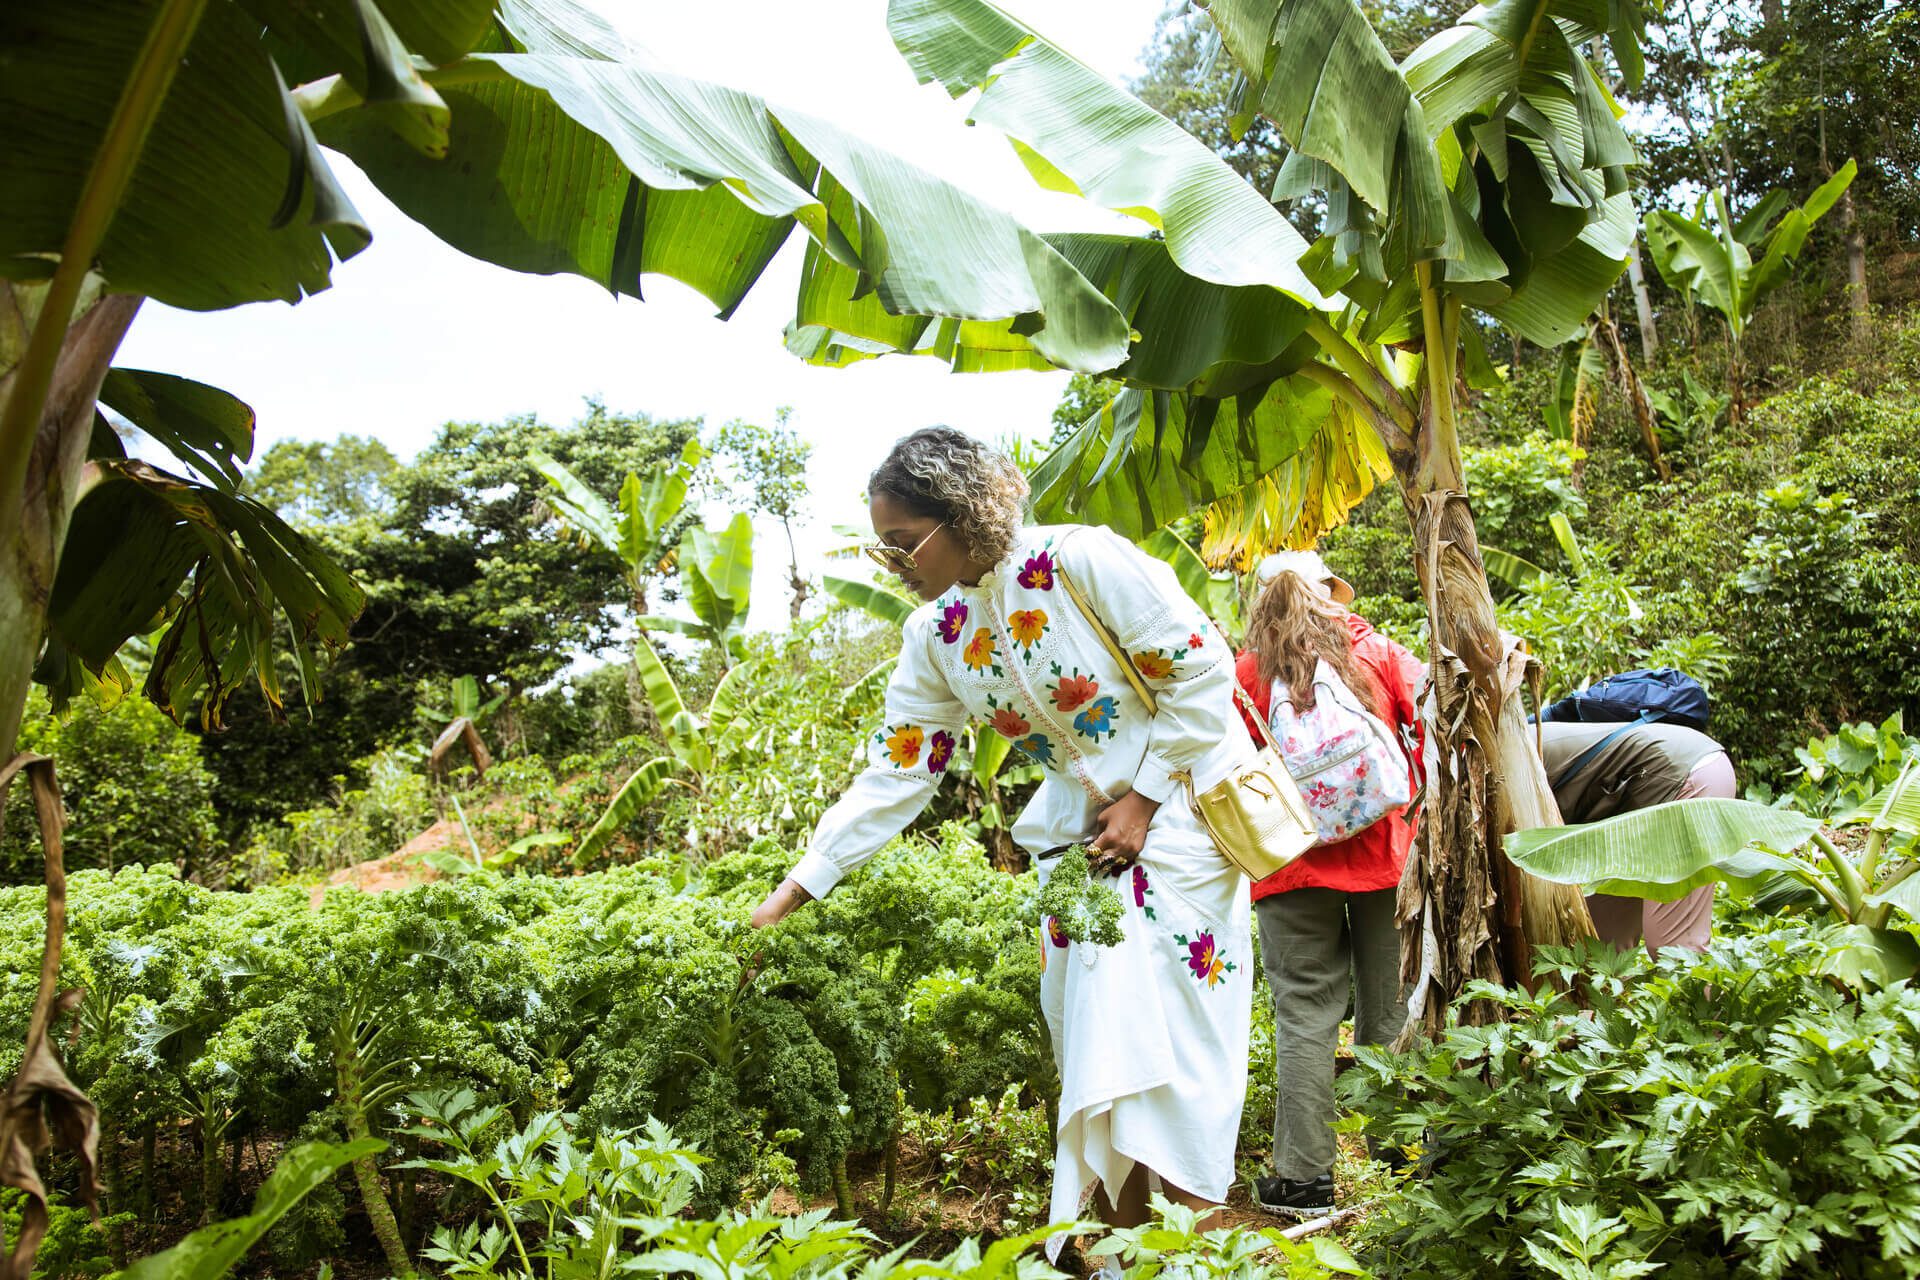 A woman picking kale at an ecological farm in Costa Rica